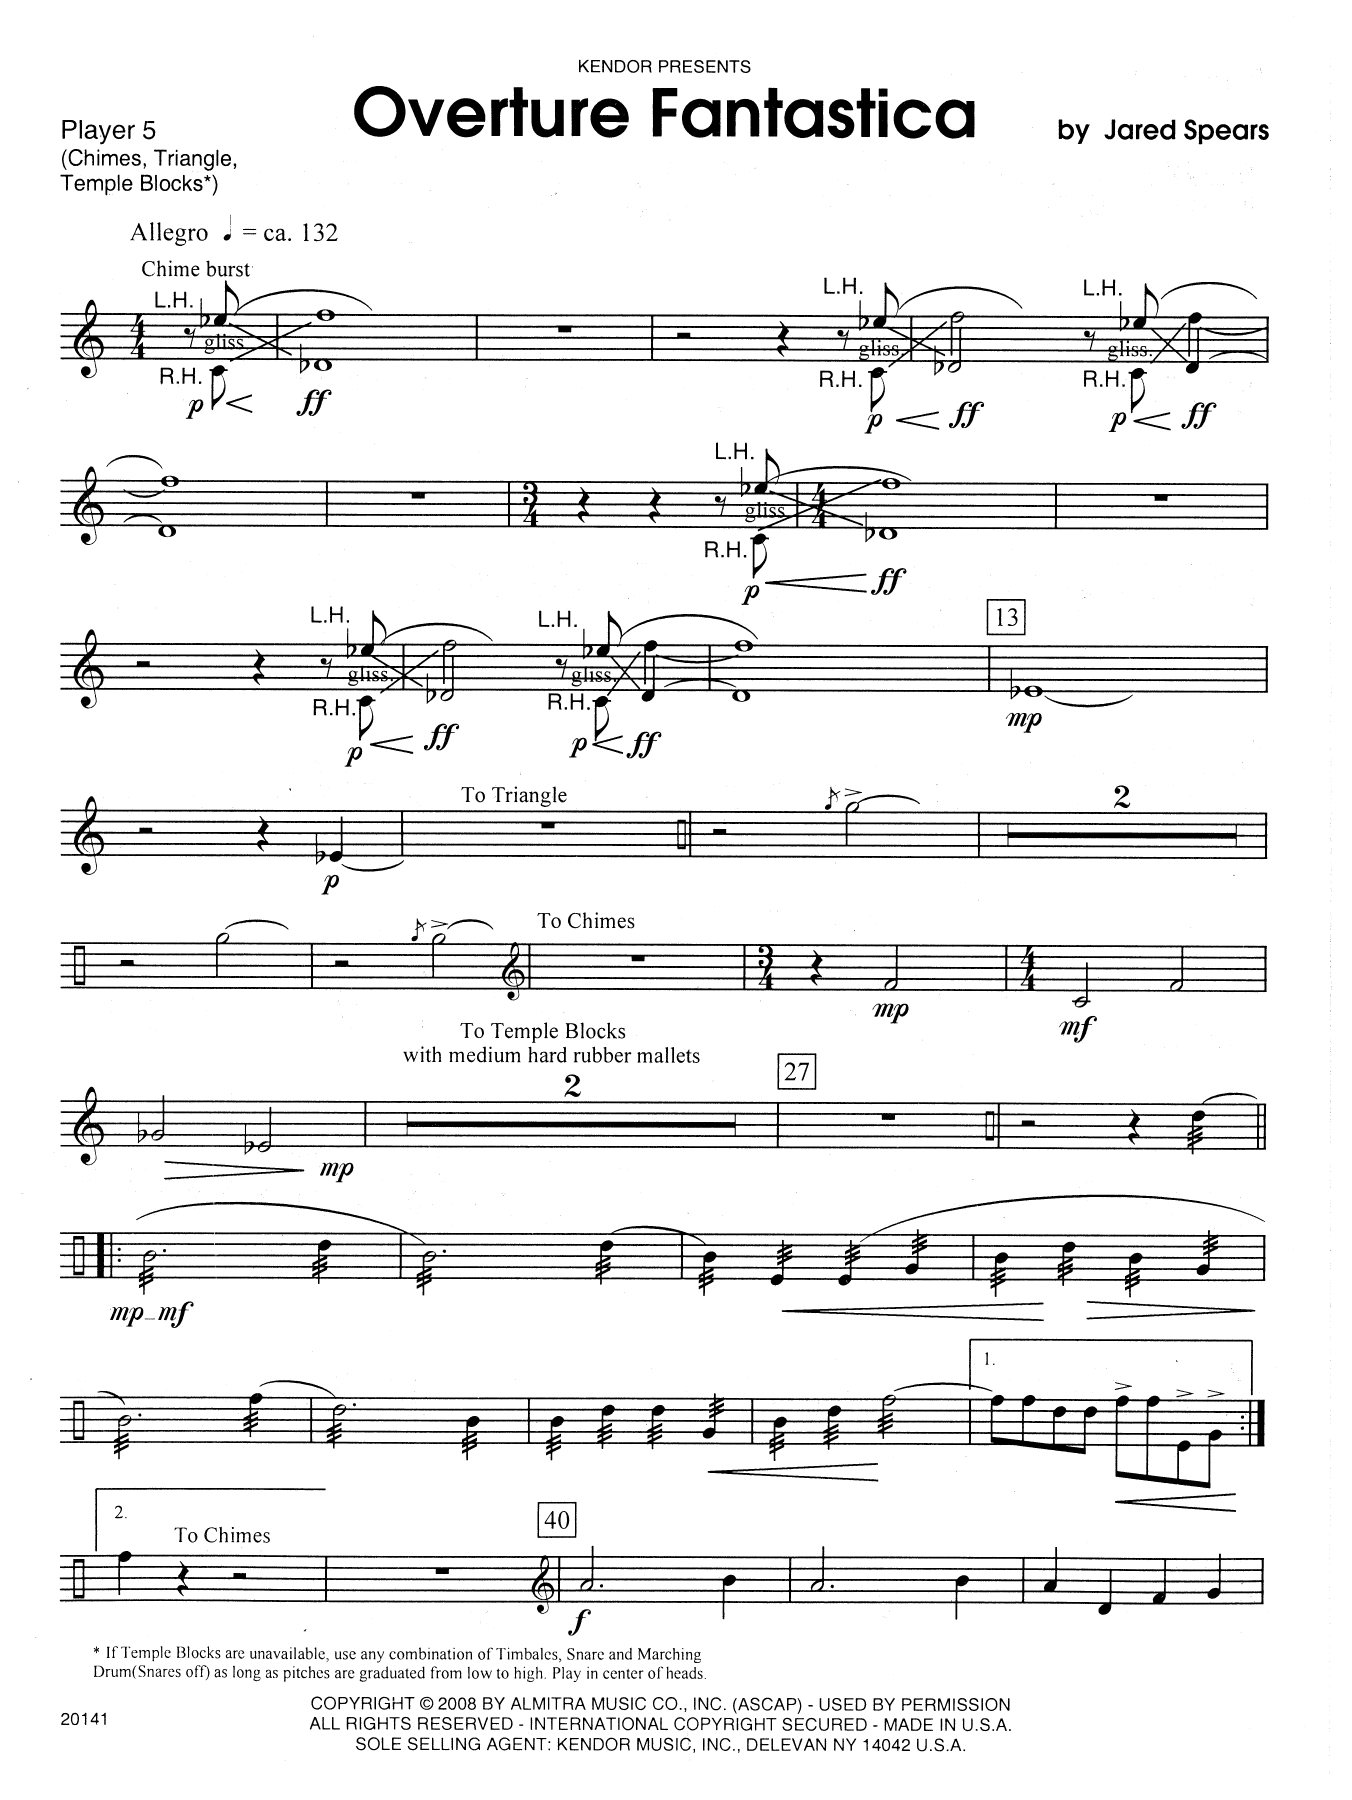 Download Jared Spears Overture Fantastica - Percussion 5 Sheet Music